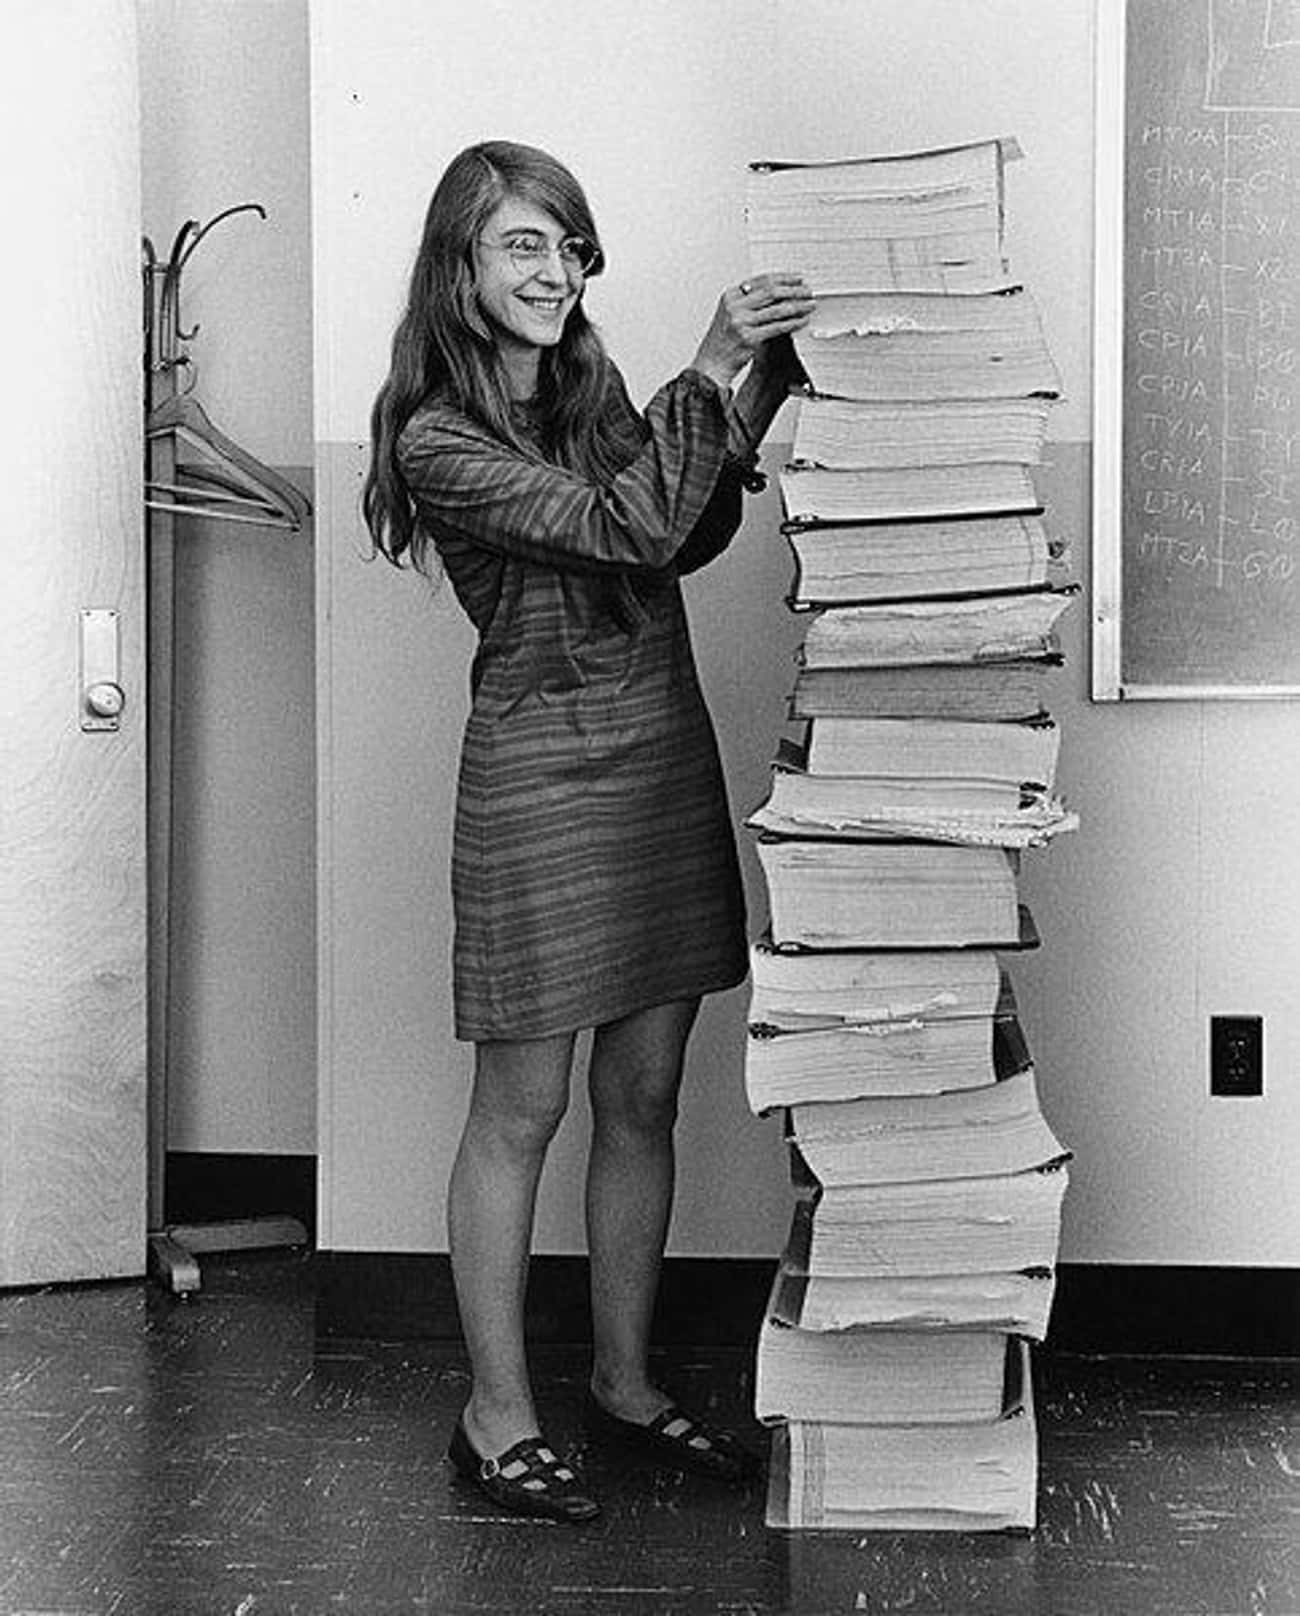 1969: Margaret Hamilton Next To The Navigation Software She And Her Team At MIT Wrote For The Apollo Program